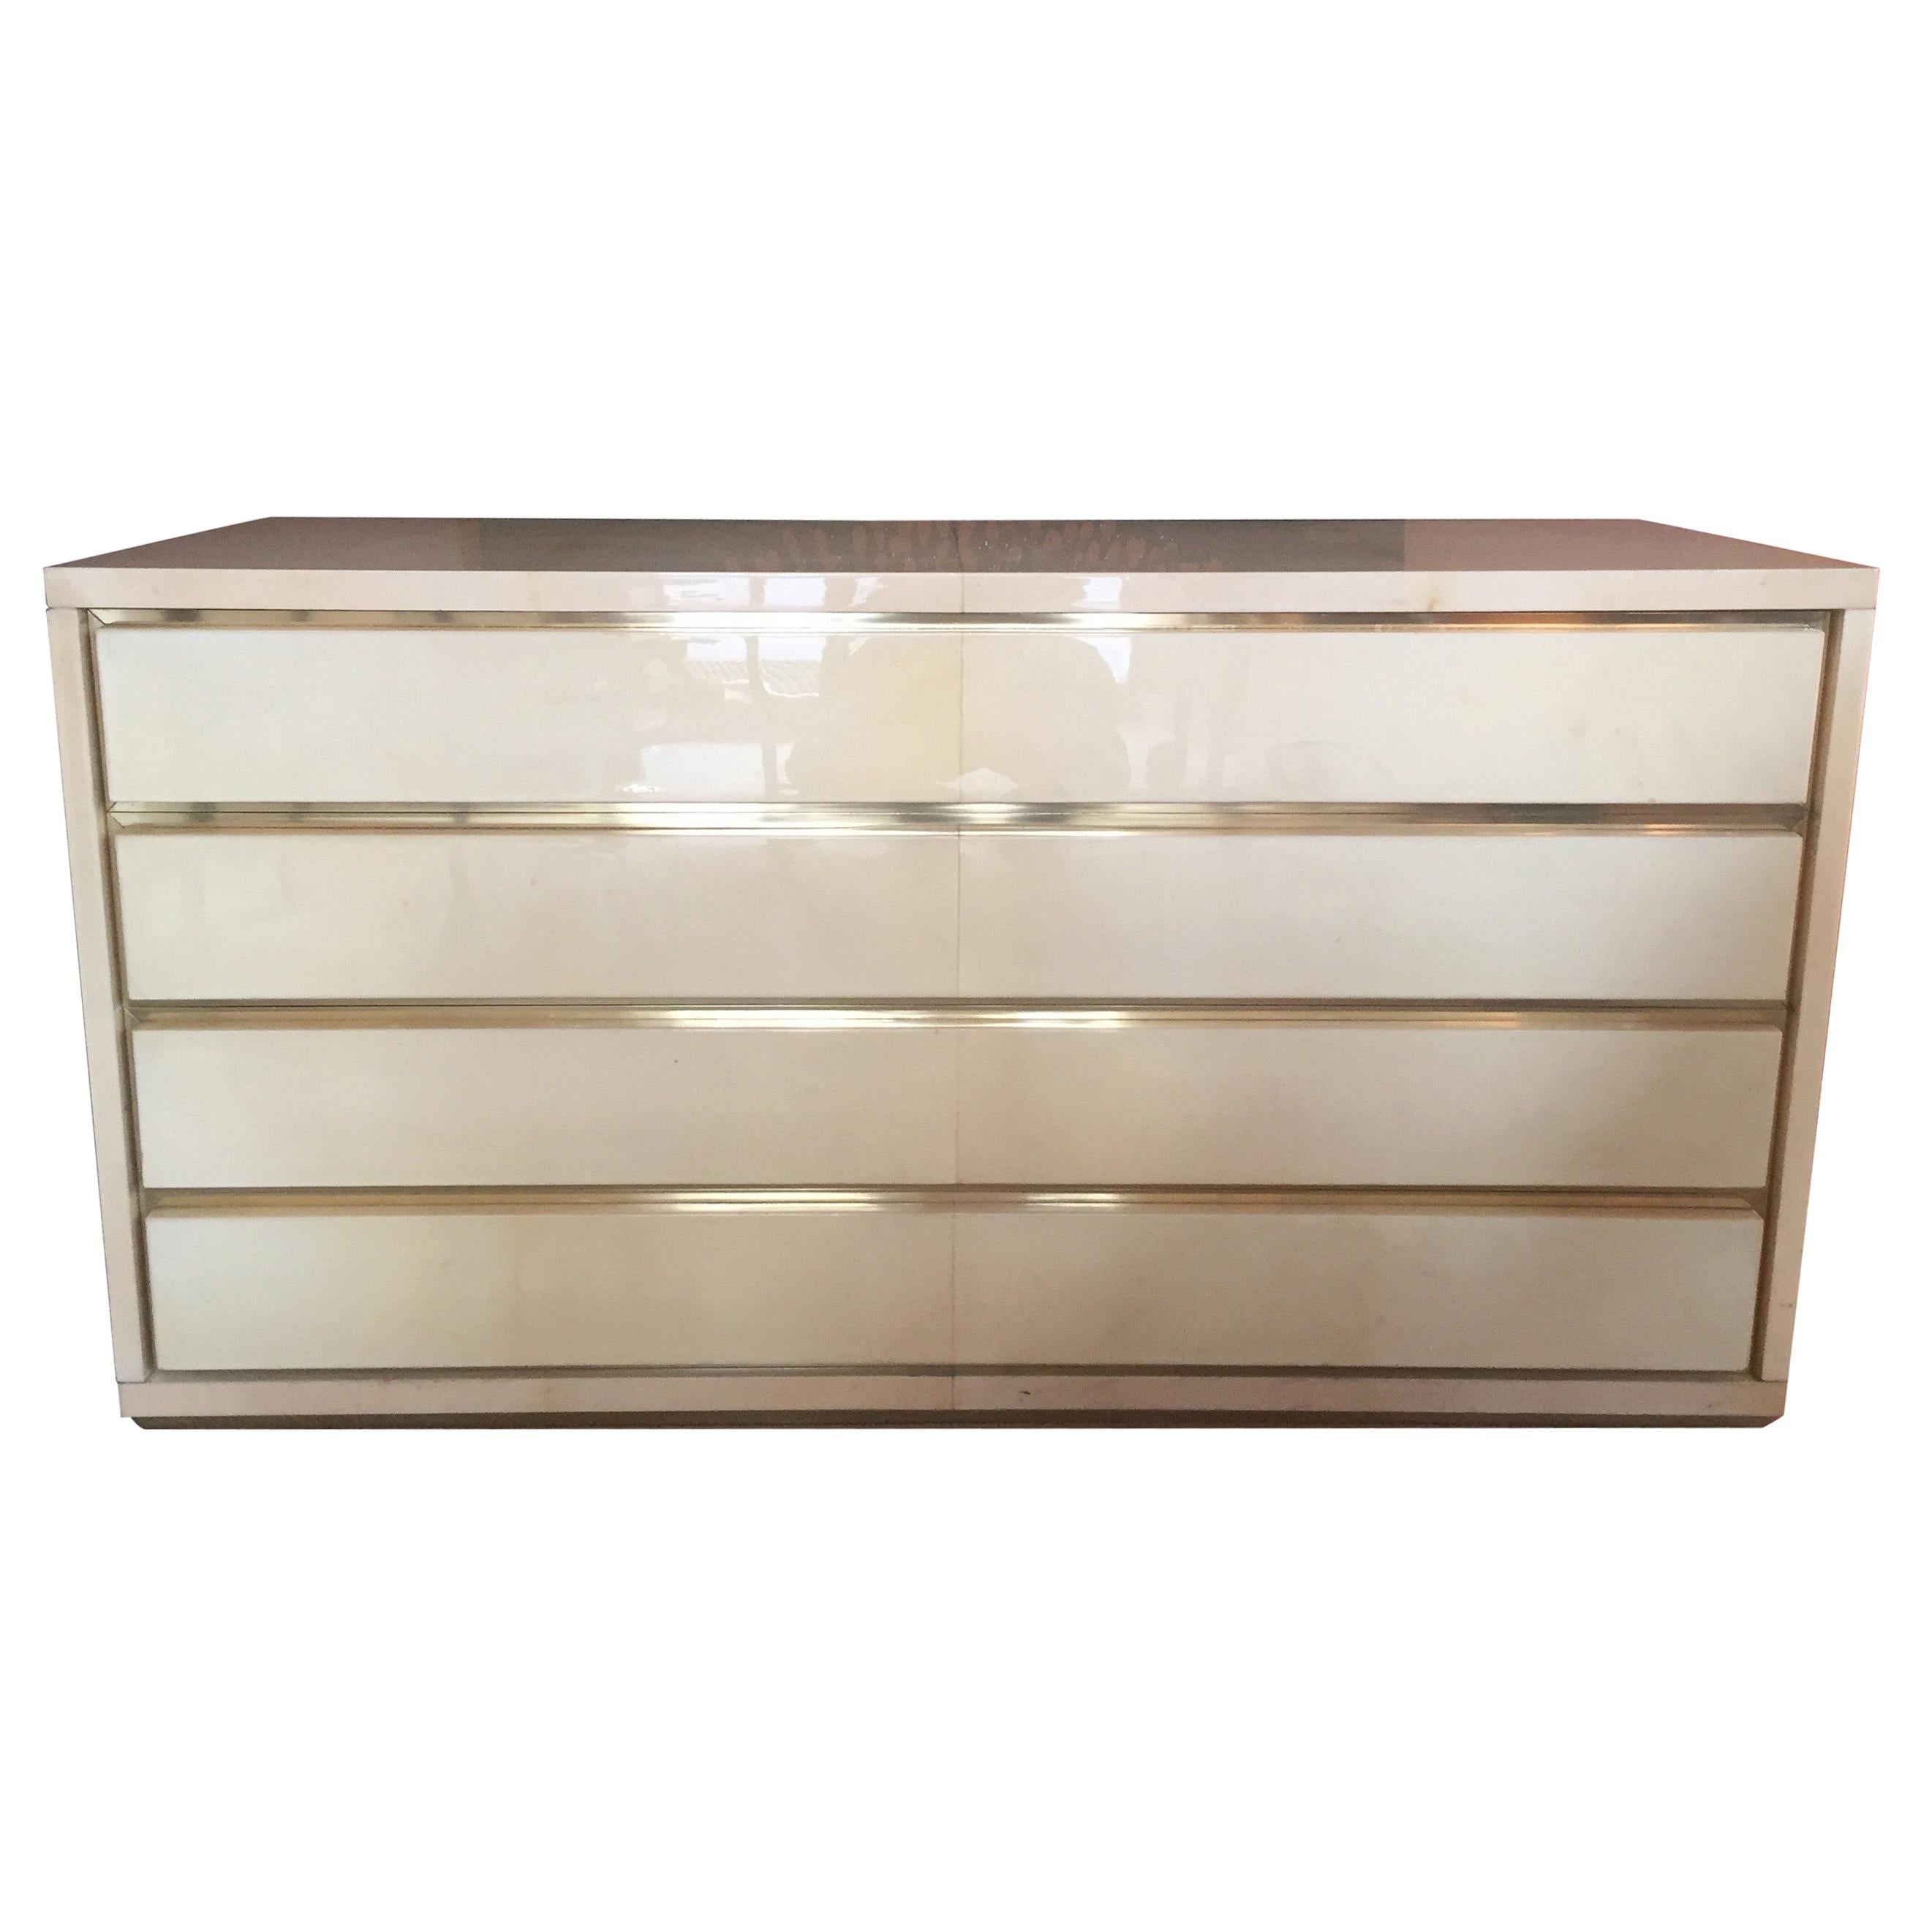 Original Italian Chest of Drawers in Brass and Parchment Designed by Aldo Tura